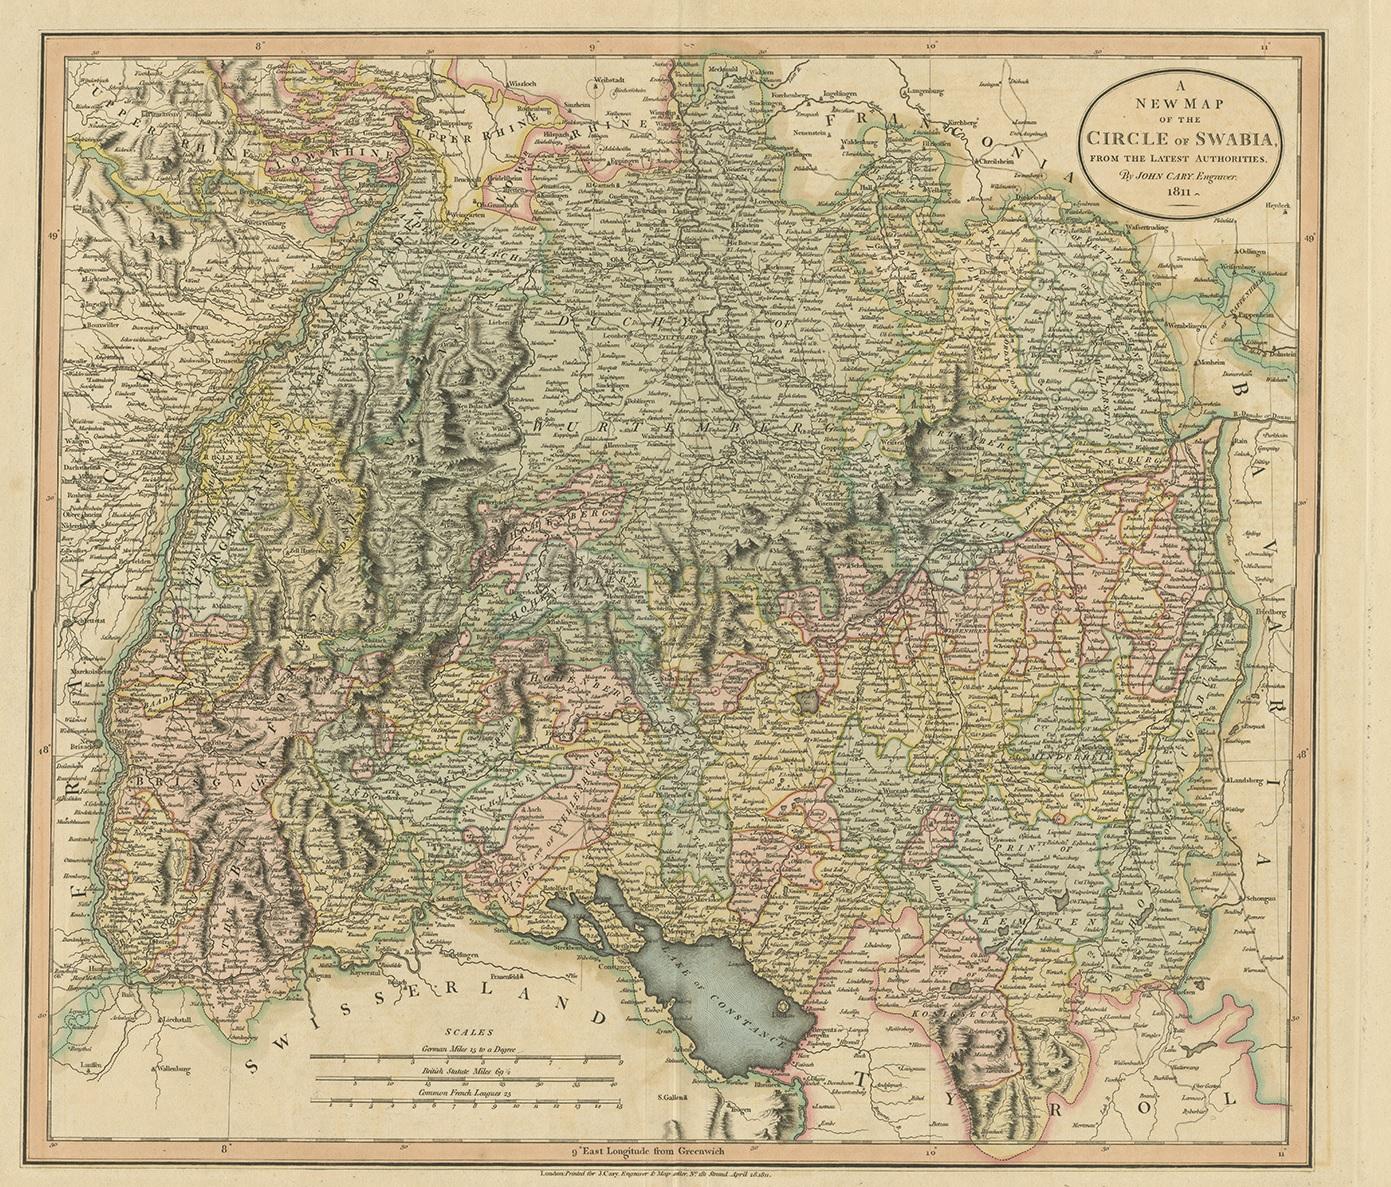 Antique map titled 'A New Map of the Circle of Swabia'. Antique map of Swabia in Southwestern Germany. Covers from the Upper Rhine region south as far as Switzerland, Lake Constance and Tyrol. Extends eastward as far as Bavaria and westward as far